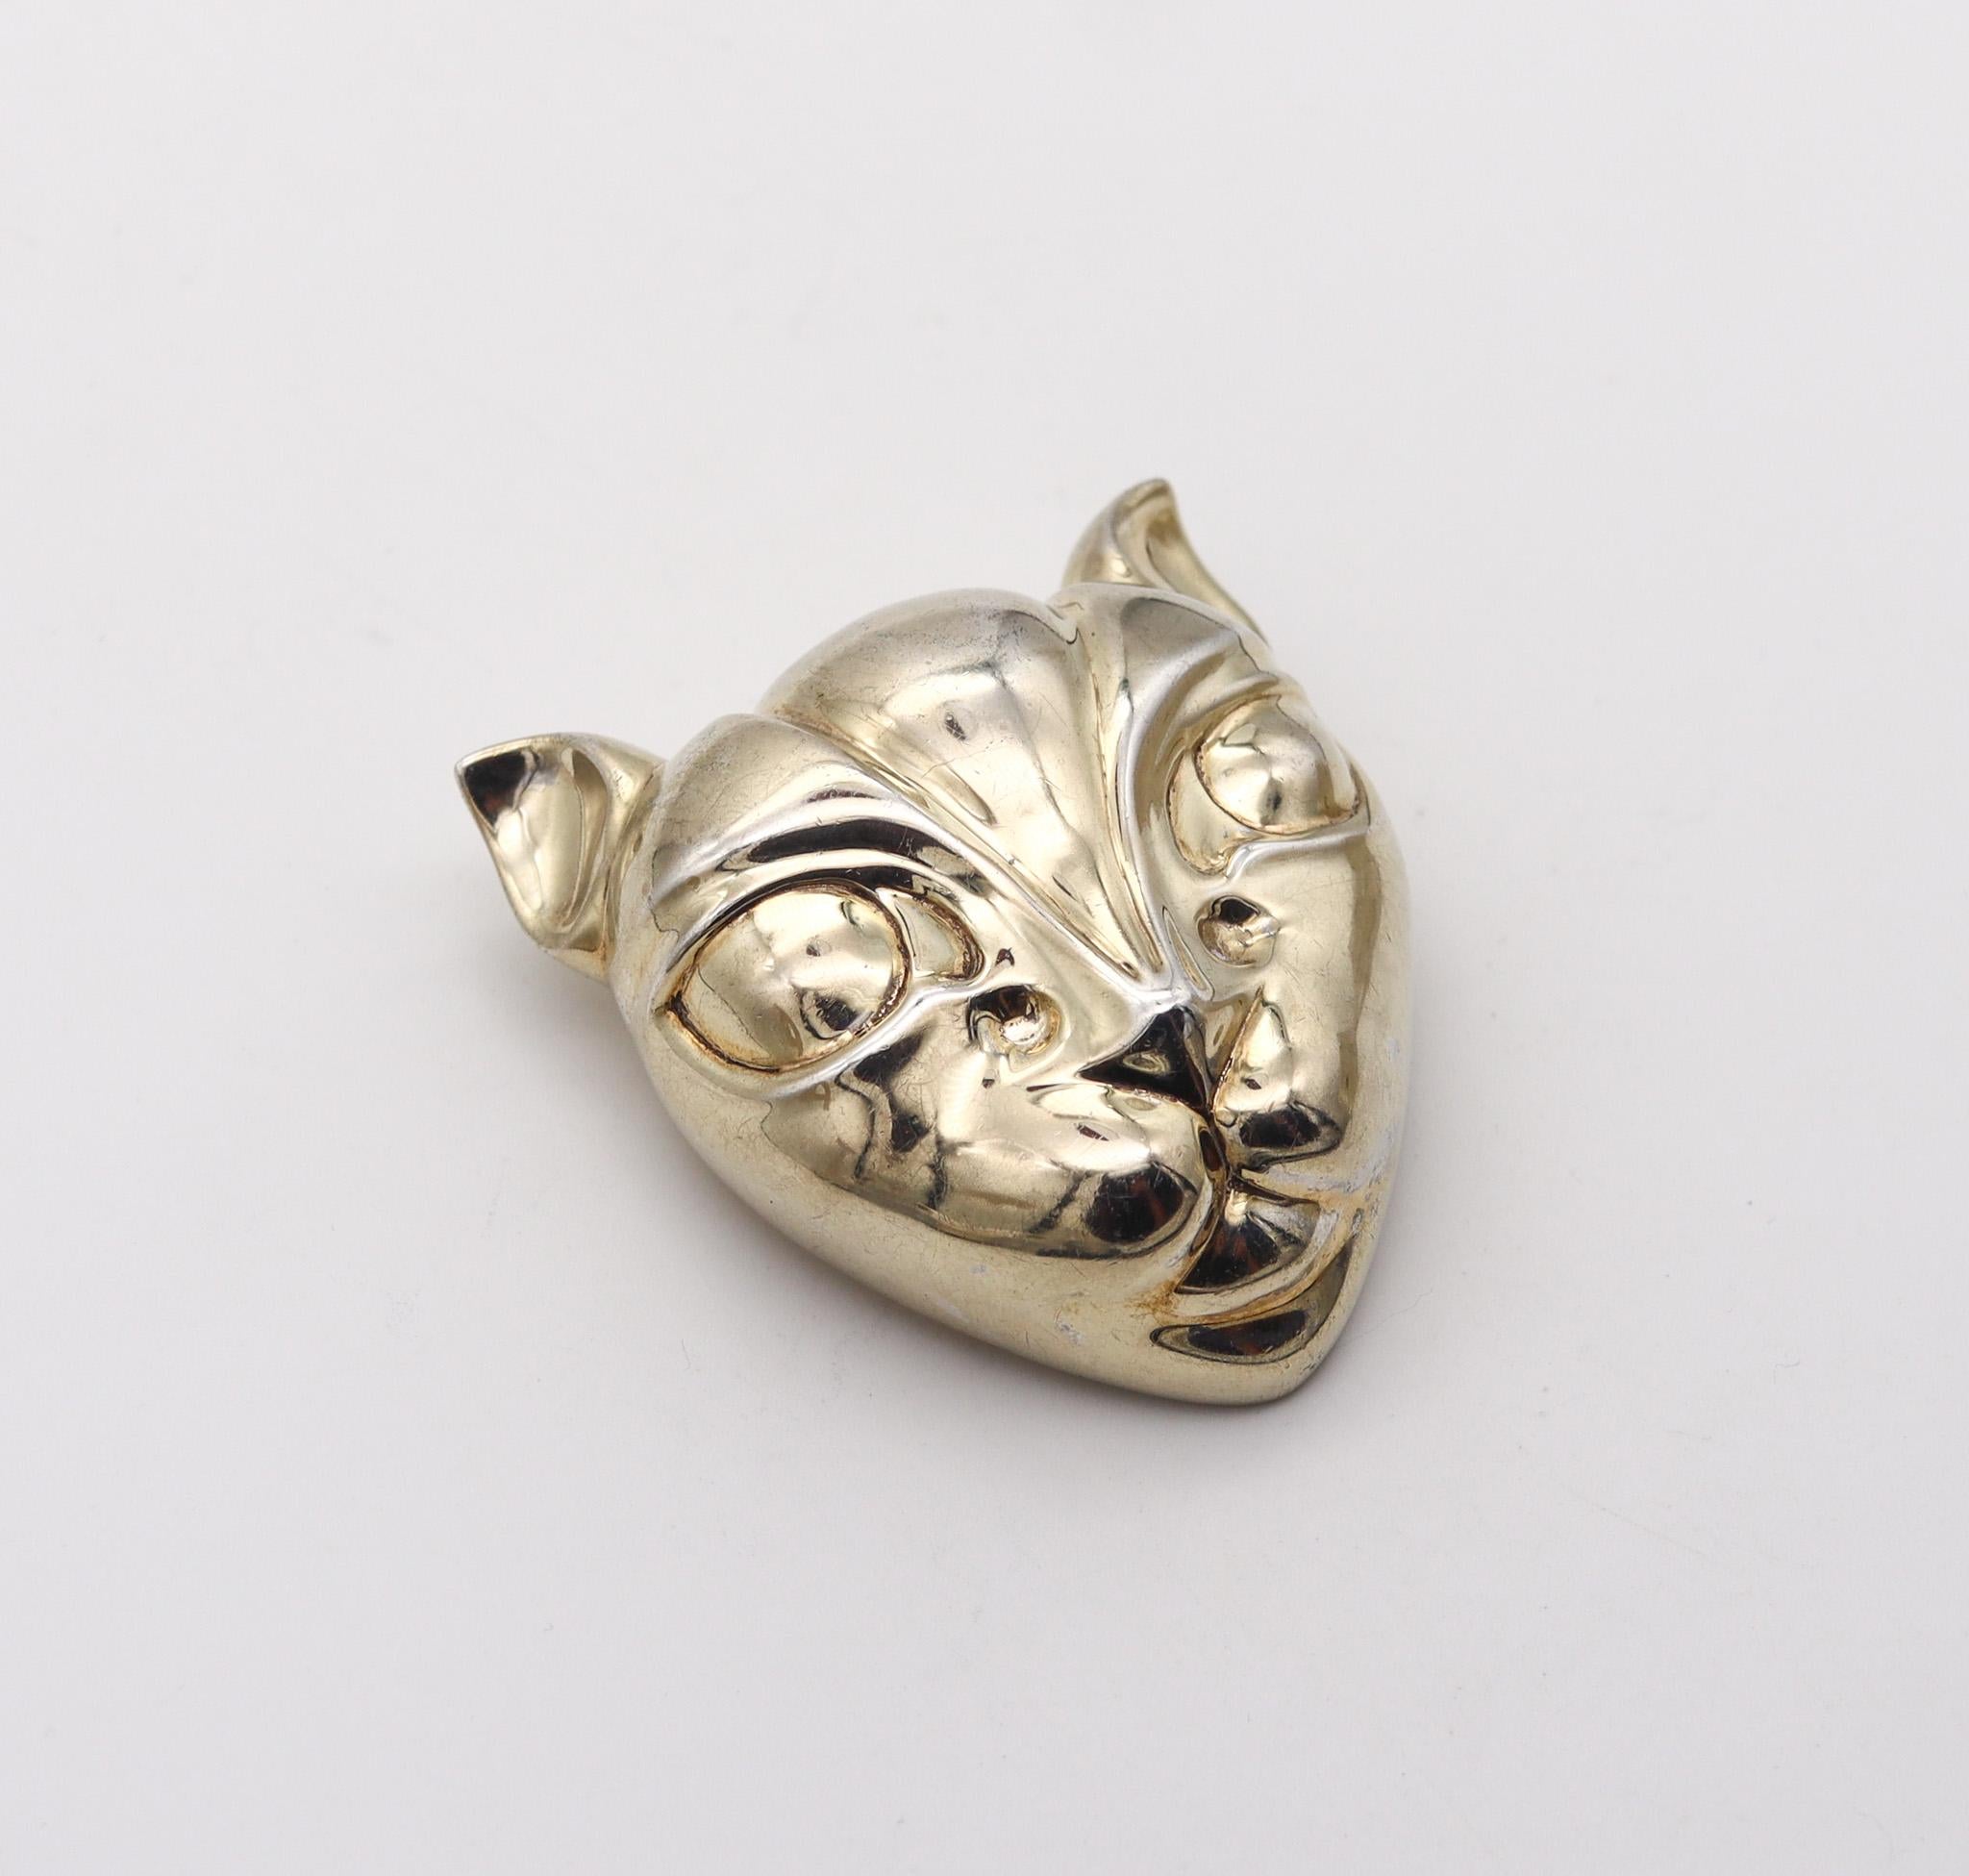 Geometric cat brooch designed by Patricia Von Musulin.

Stunning pendant-brooch, created in the shape of a geometric cat by Patricia Von Musulin during the modernist period, back in the late 1970. The brooch was carefully crafted in solid .925/.999